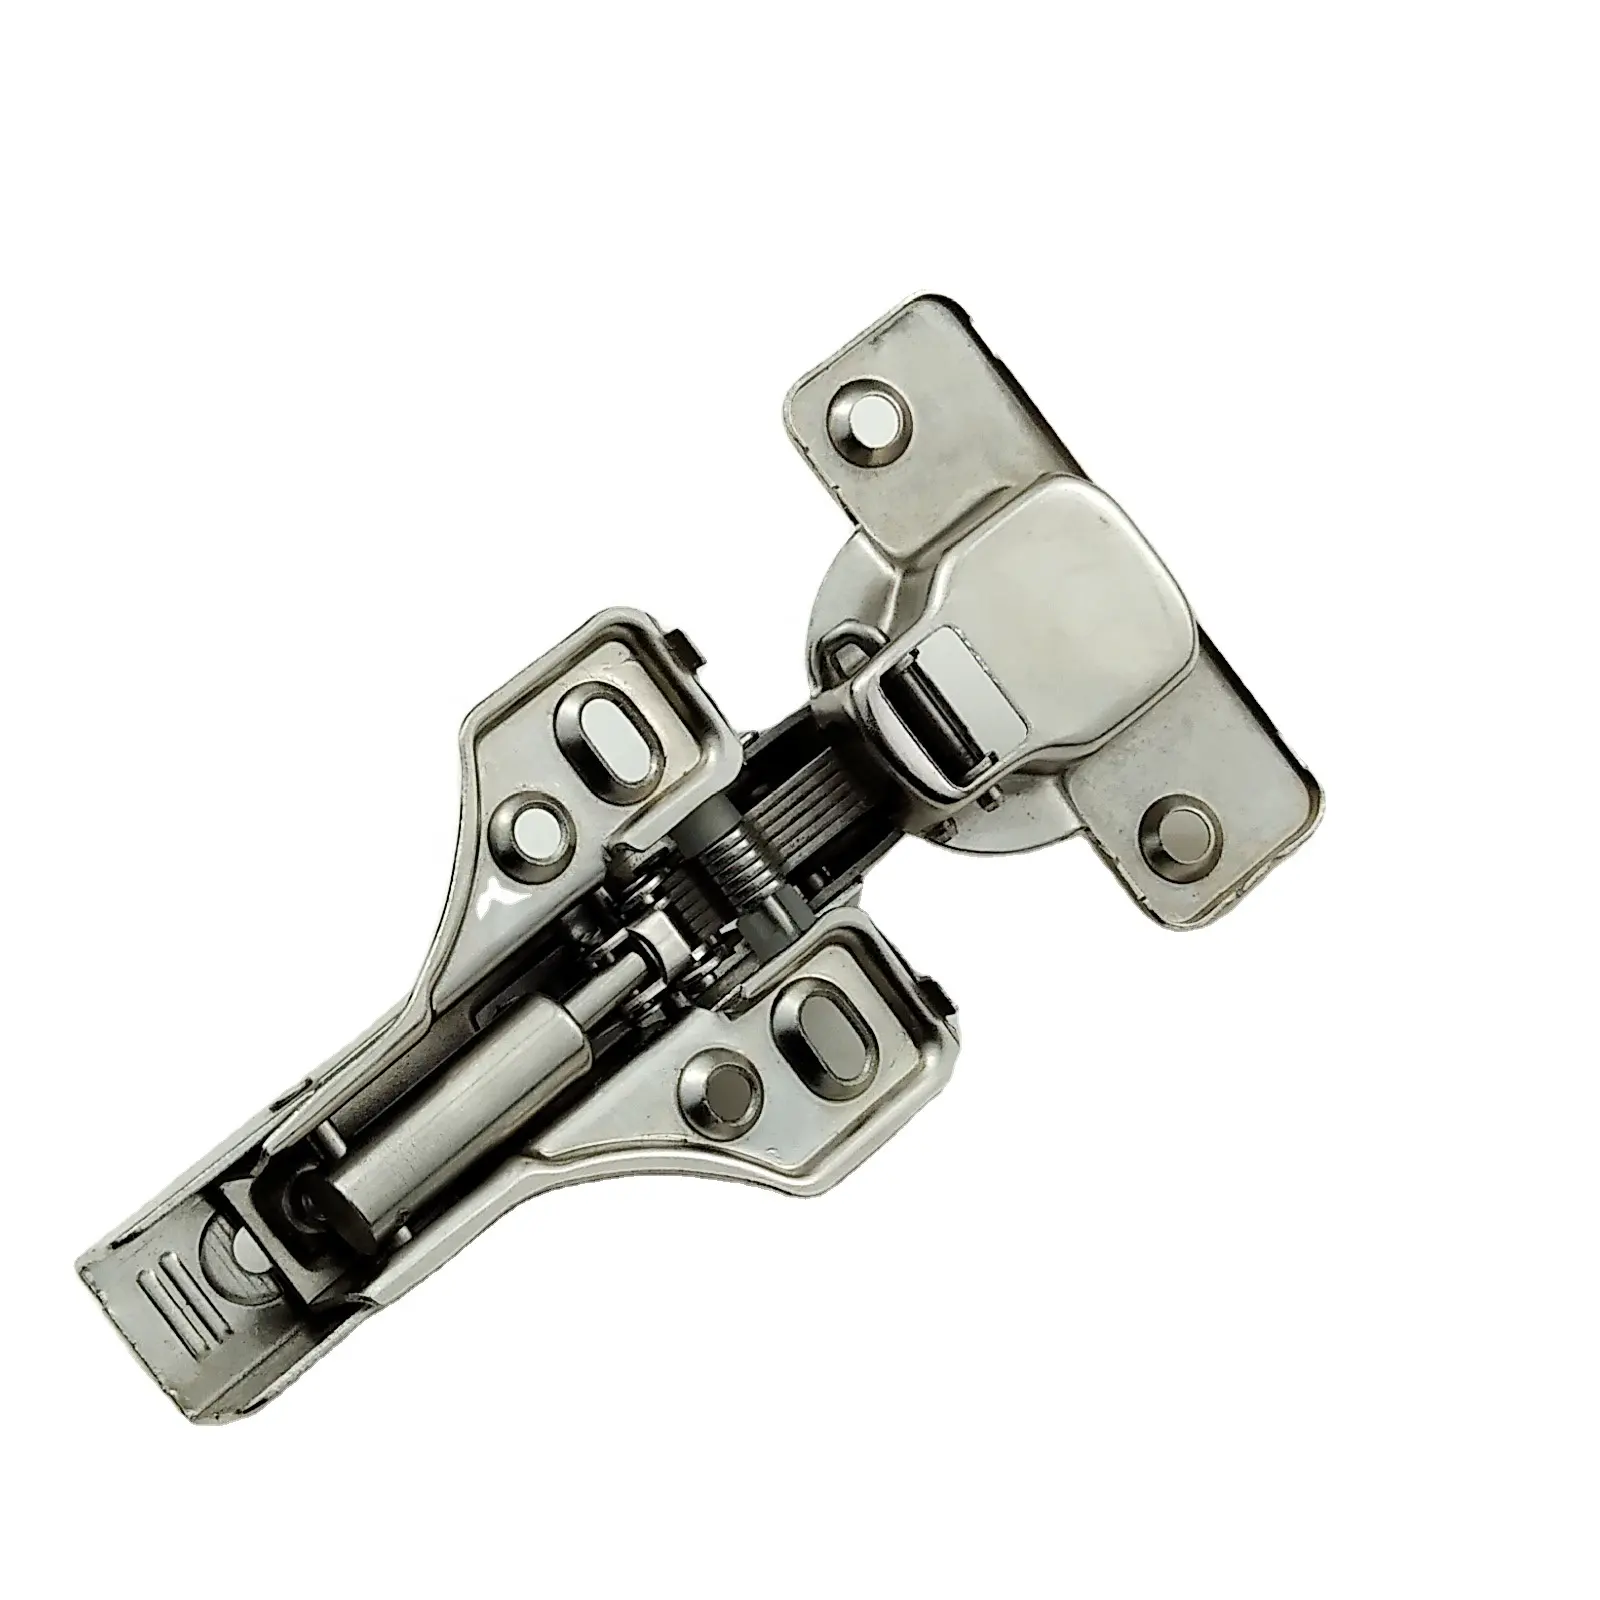 ROEASY Soft Opening Face Frame Mounting Furniture hardware butterfly hinge aluminium door hinges for heavy doors china